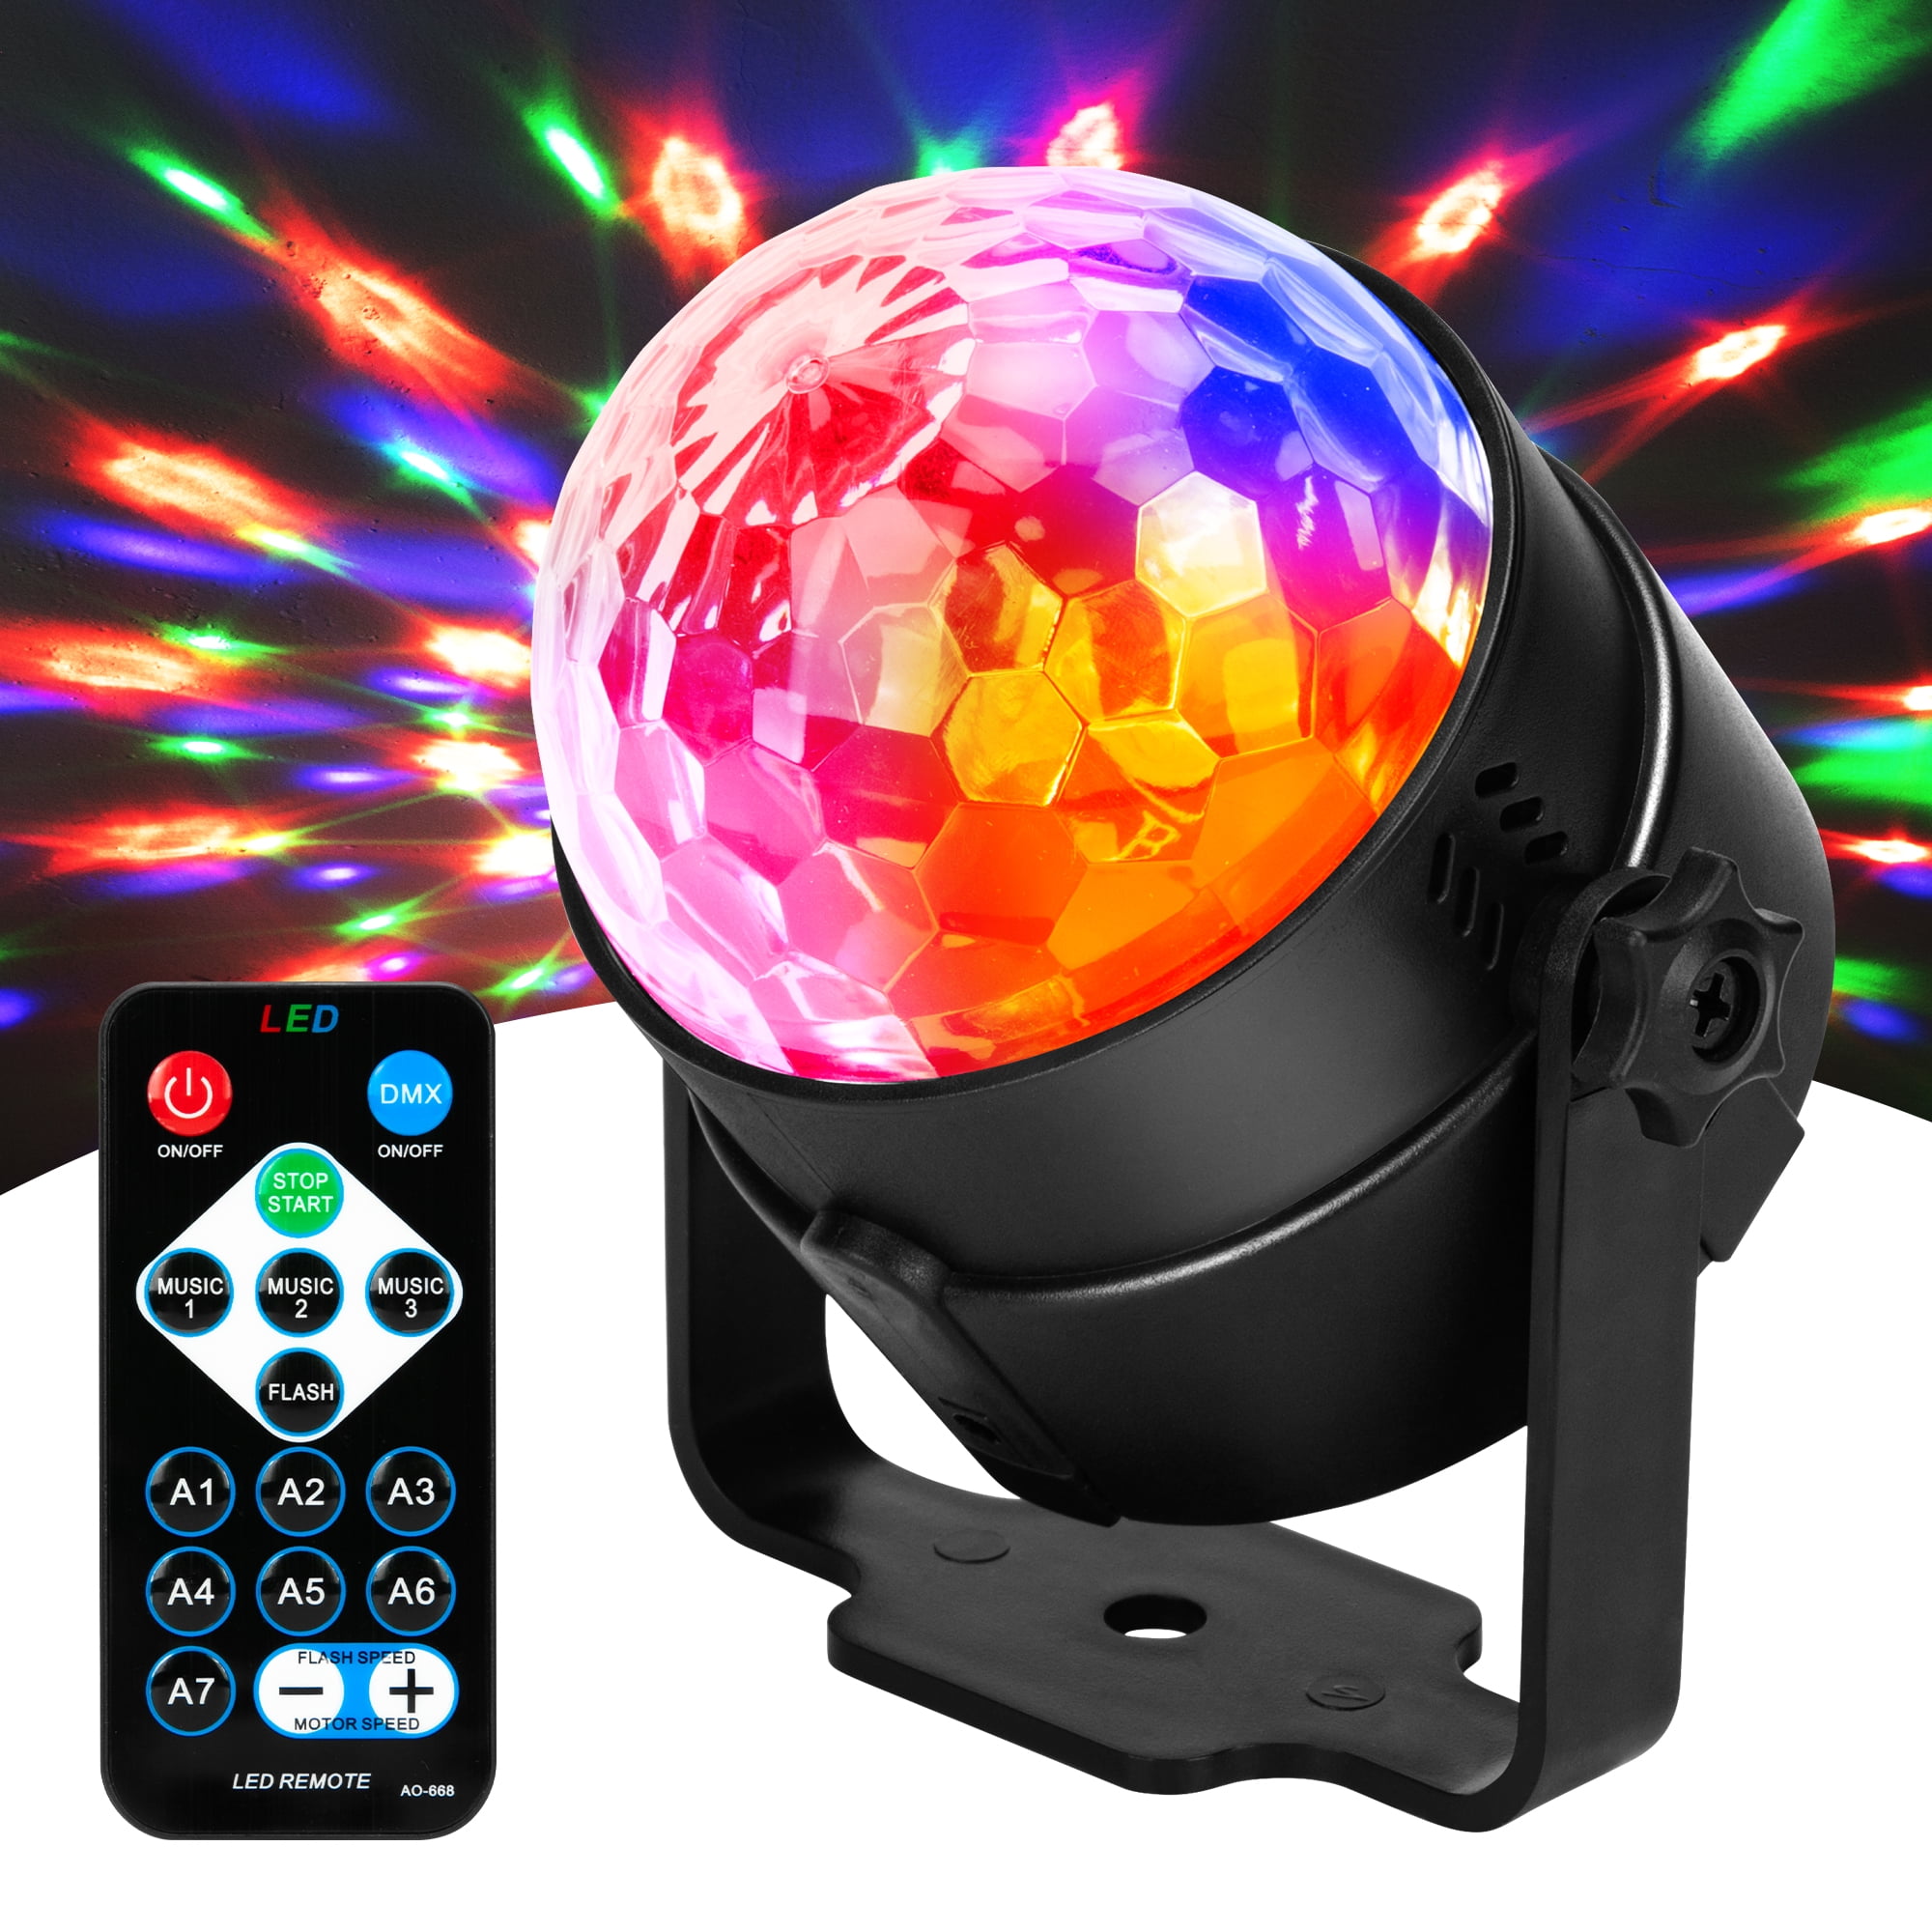 Portable Sound Activated Mini Disco Ball,Party Lights for Bedroom Car Strobe Lights Dj Lights Disco Light Bulb,Led Stage Light,Festival Party Light,Car Decoration Disco Ball